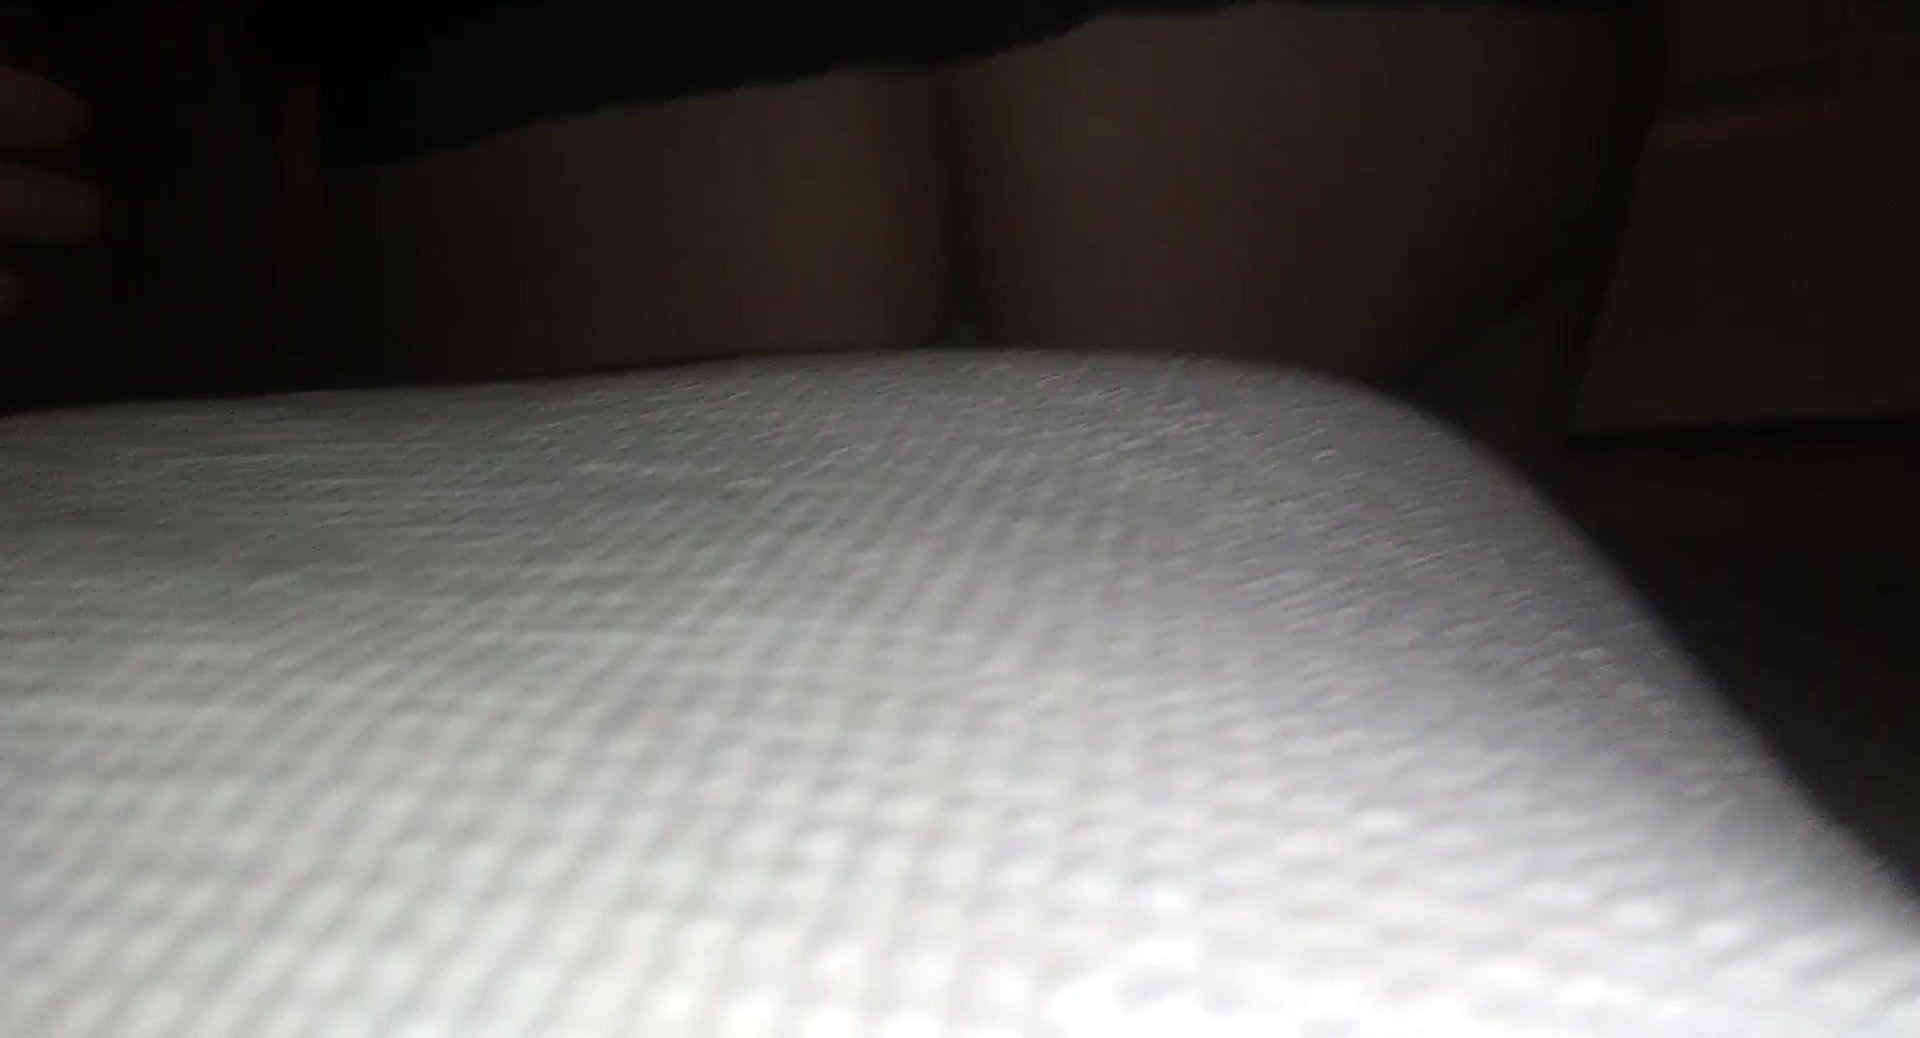 Jess riding my cock with her nasty asshole